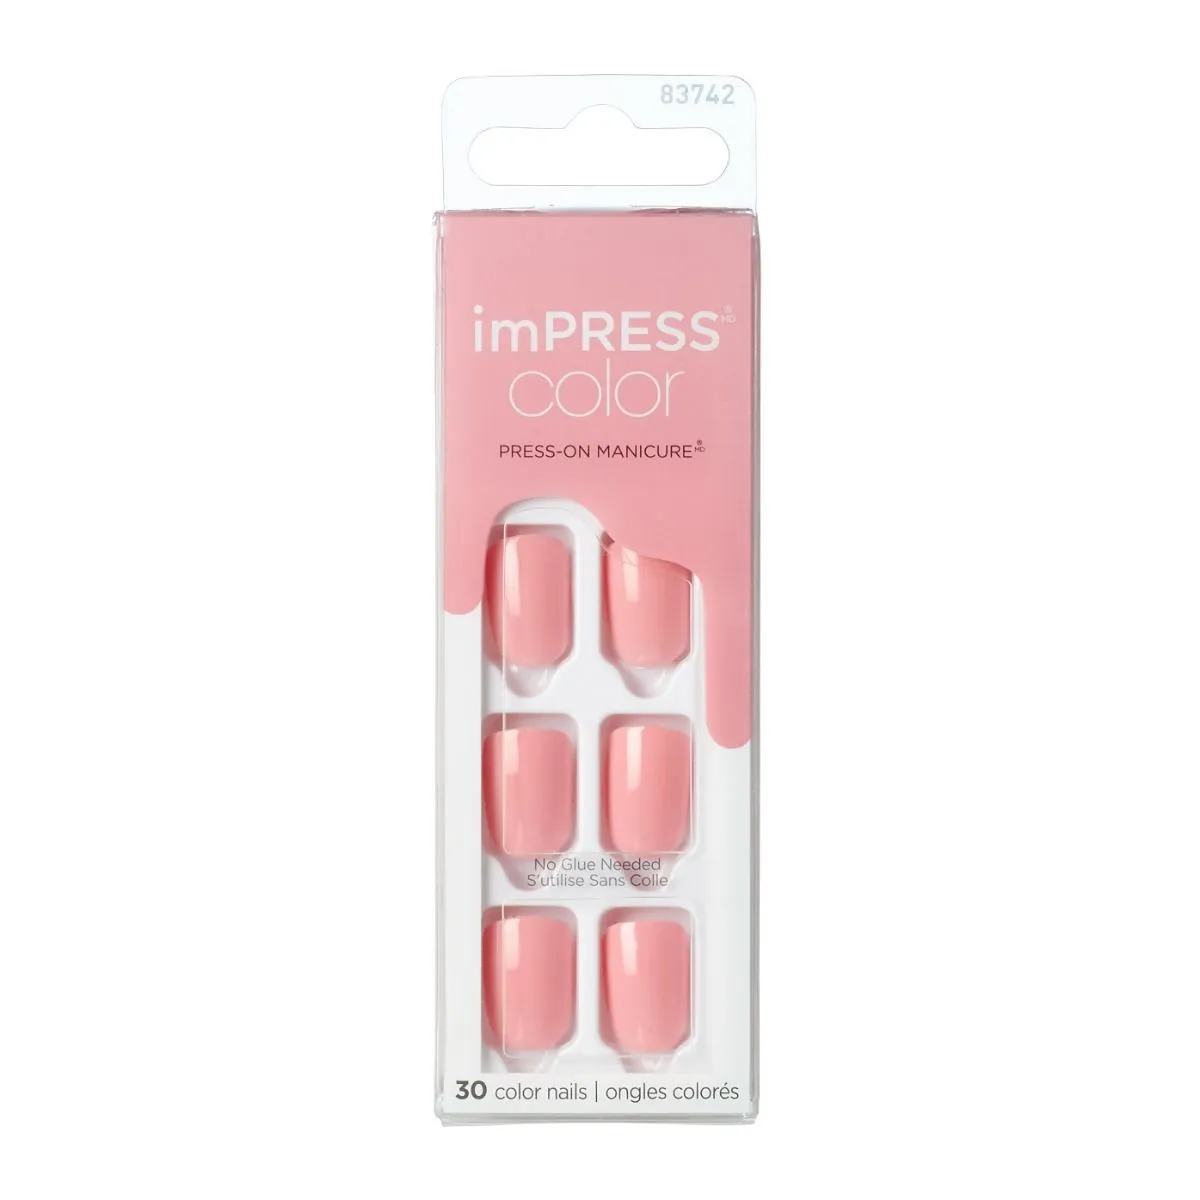 KISS ImPRESS Color Press-On Manicure - Pretty Pink - Taille S